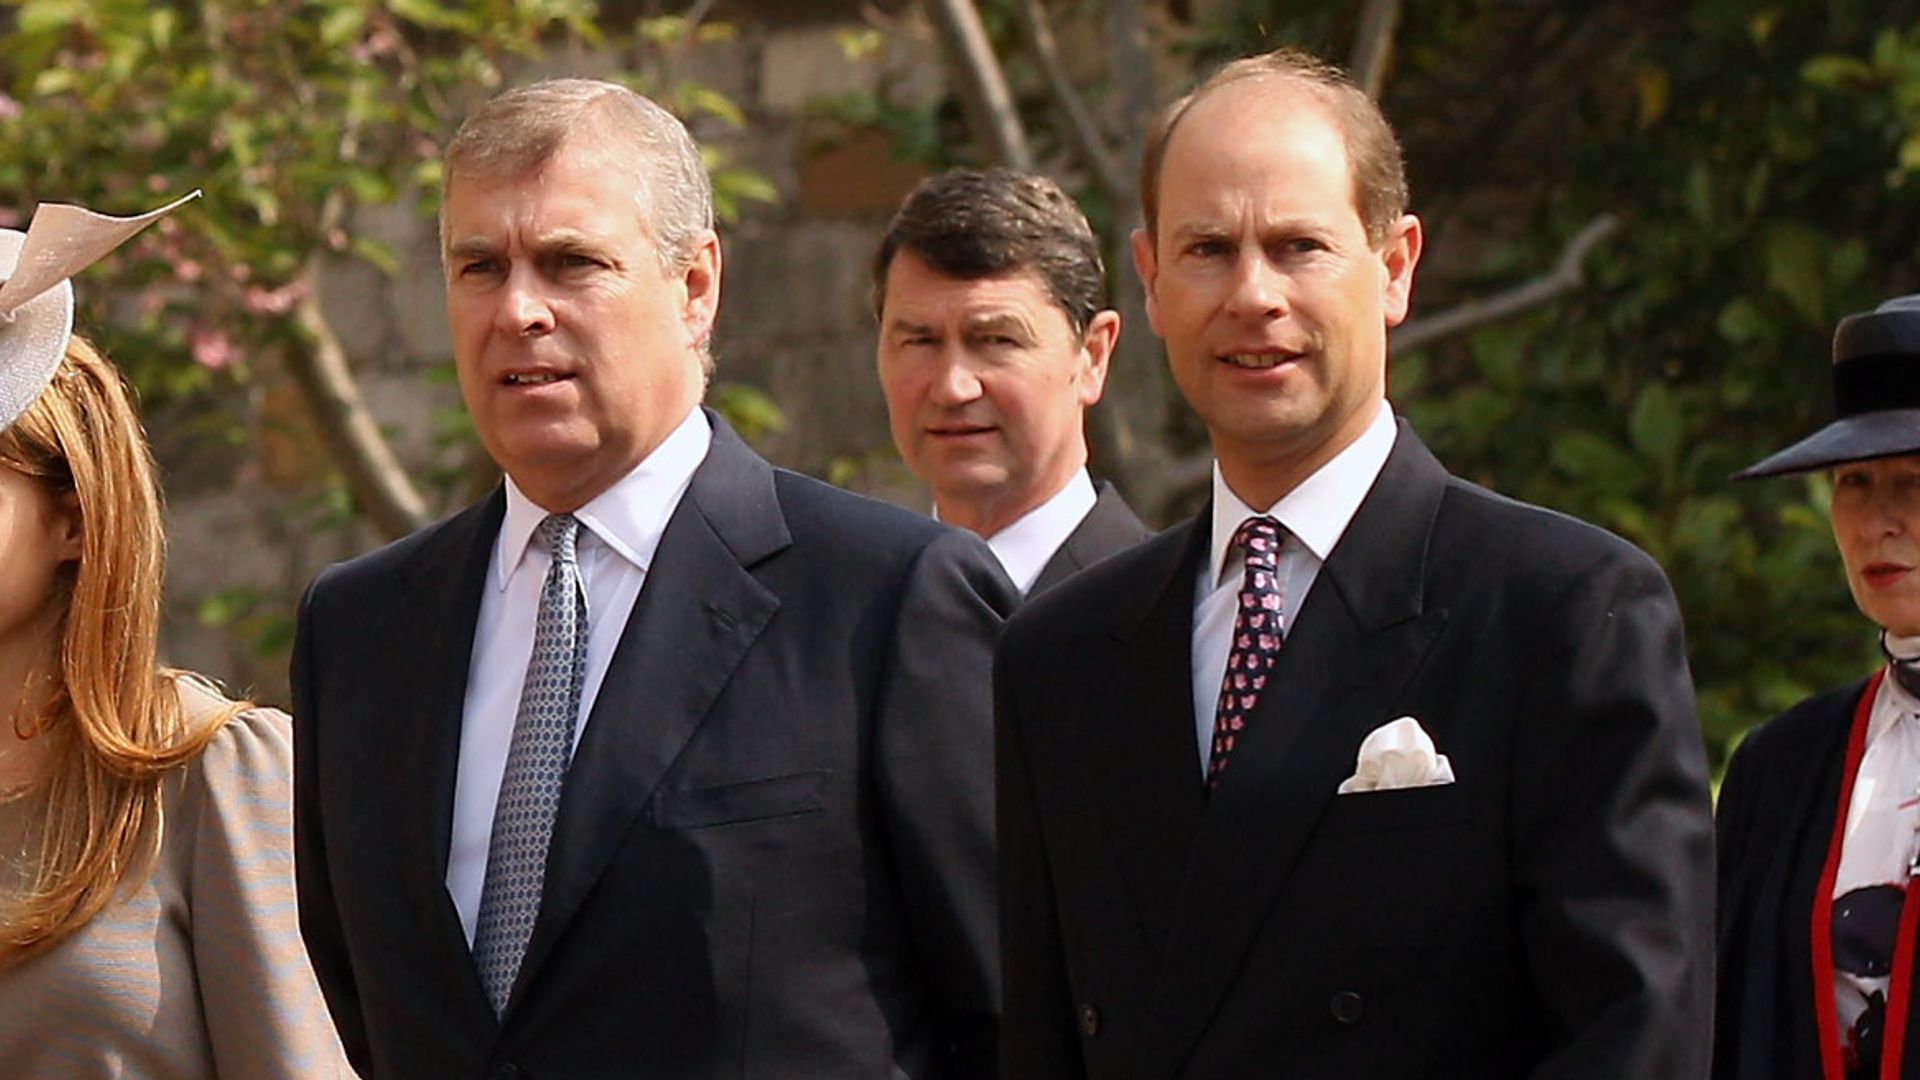 Prince Andrew and Prince Edward walking together